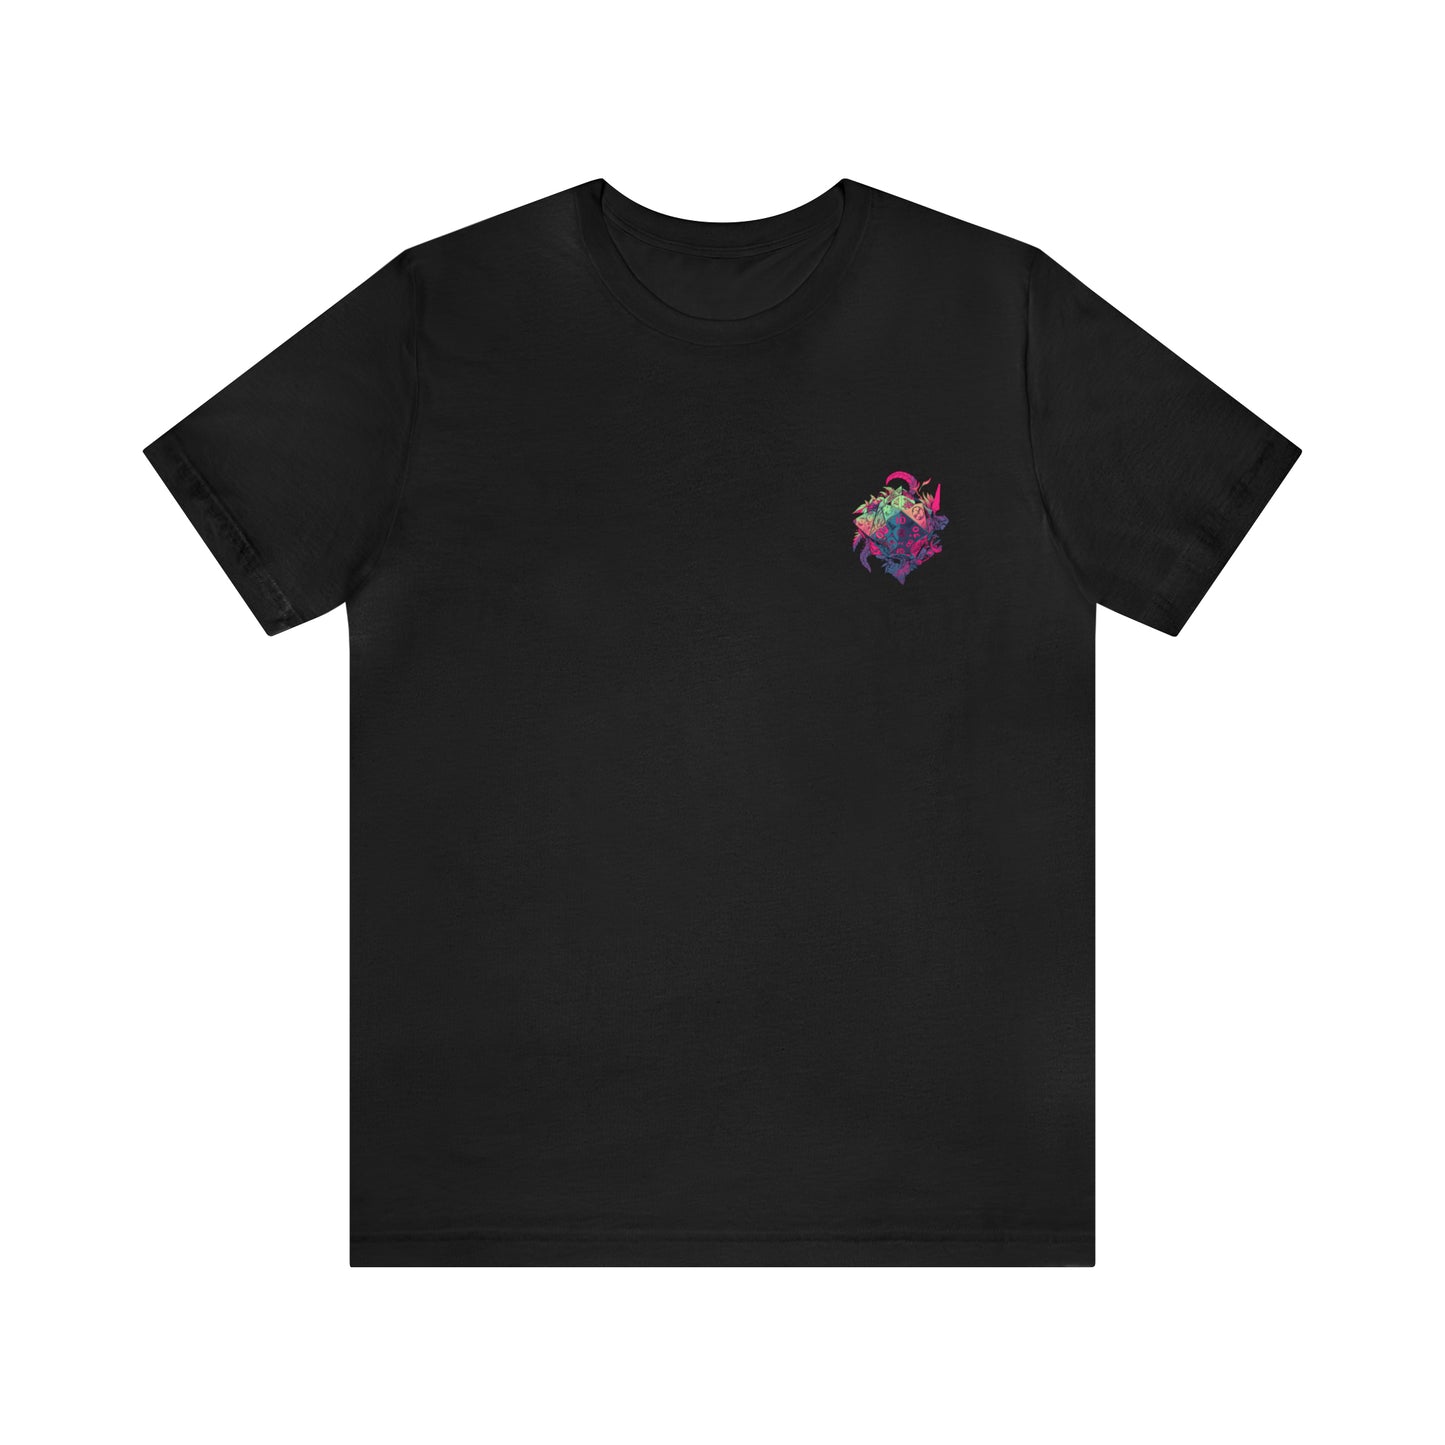 black-quest-thread-tee-shirt-with-small-colorful-dice-in-pink-jungle-on-chest